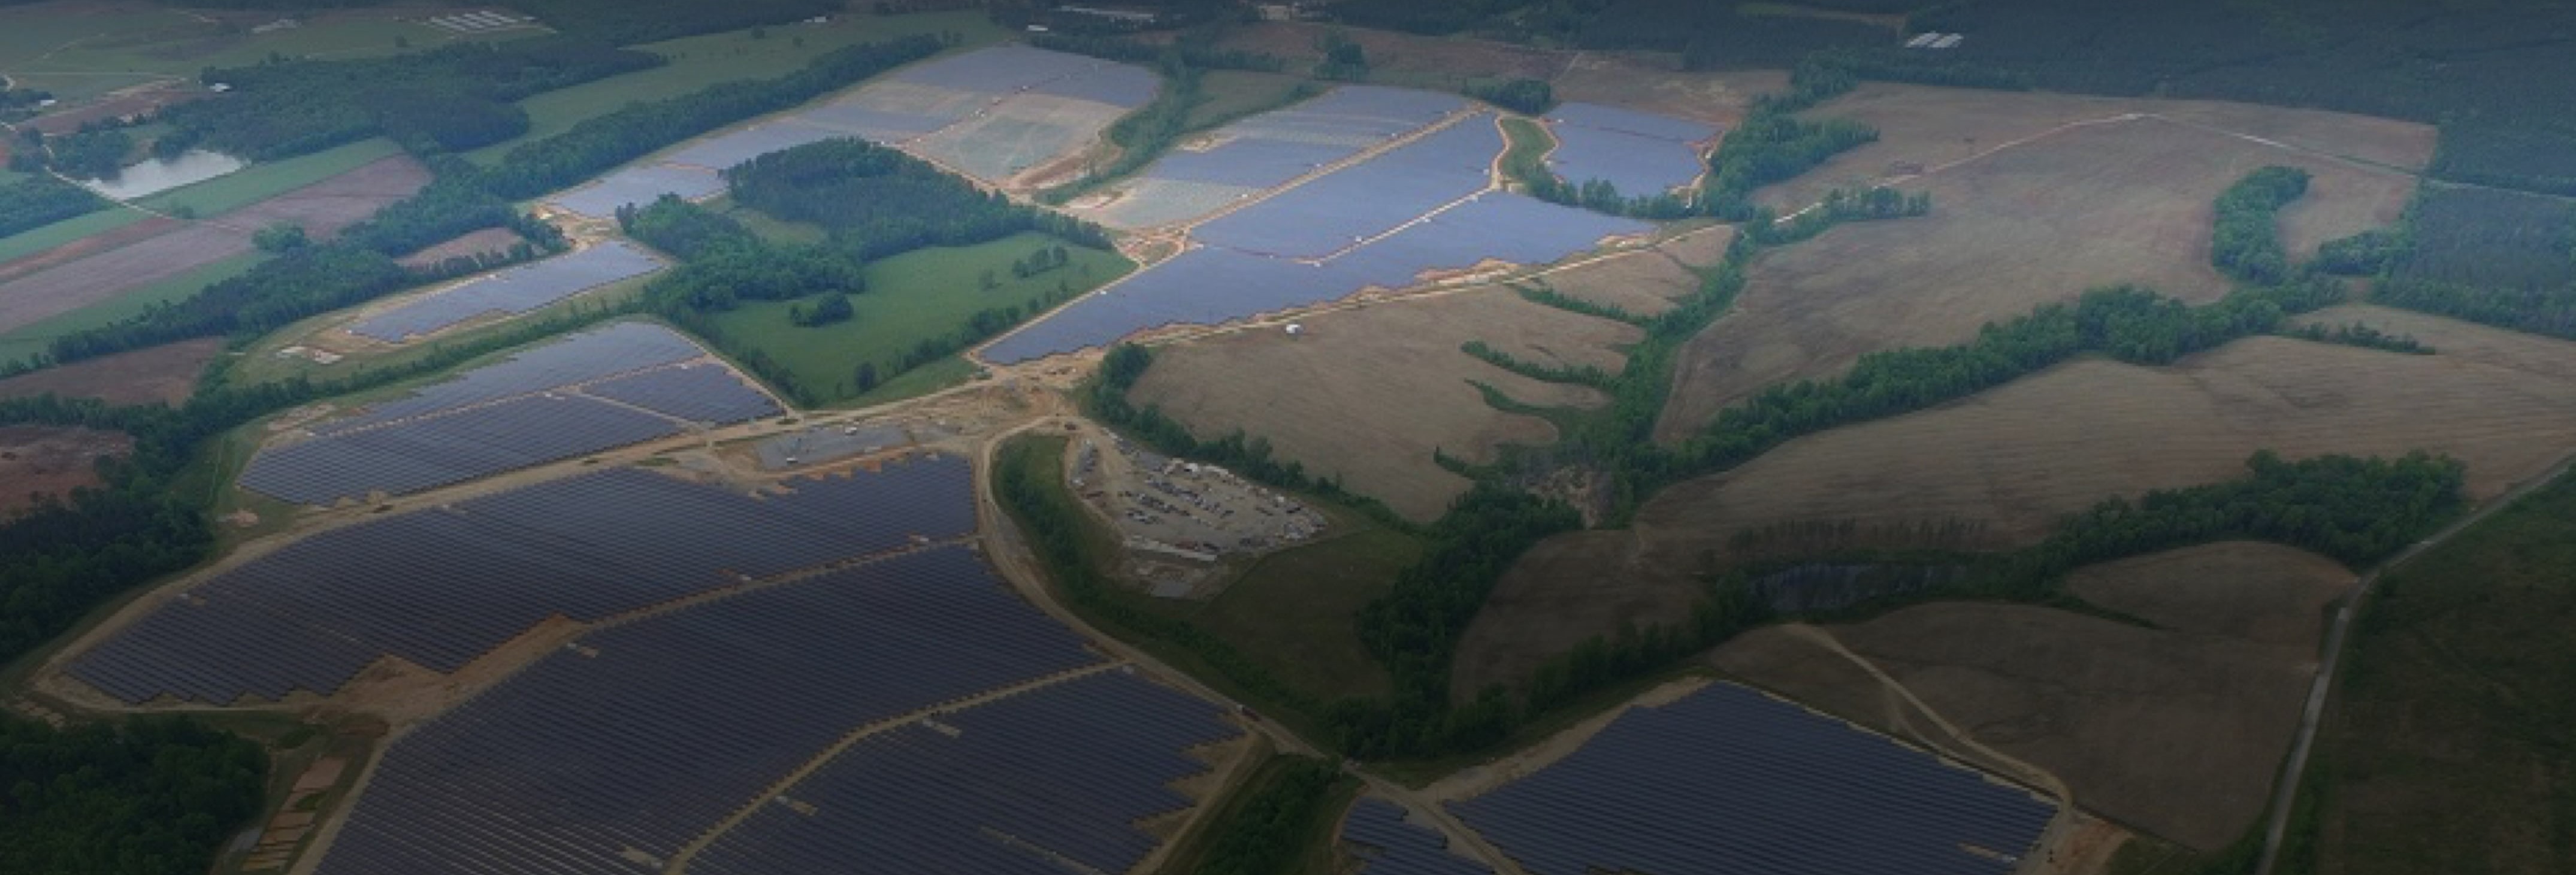 Birdseye view of large solar farm with rows of solar panels among green fields